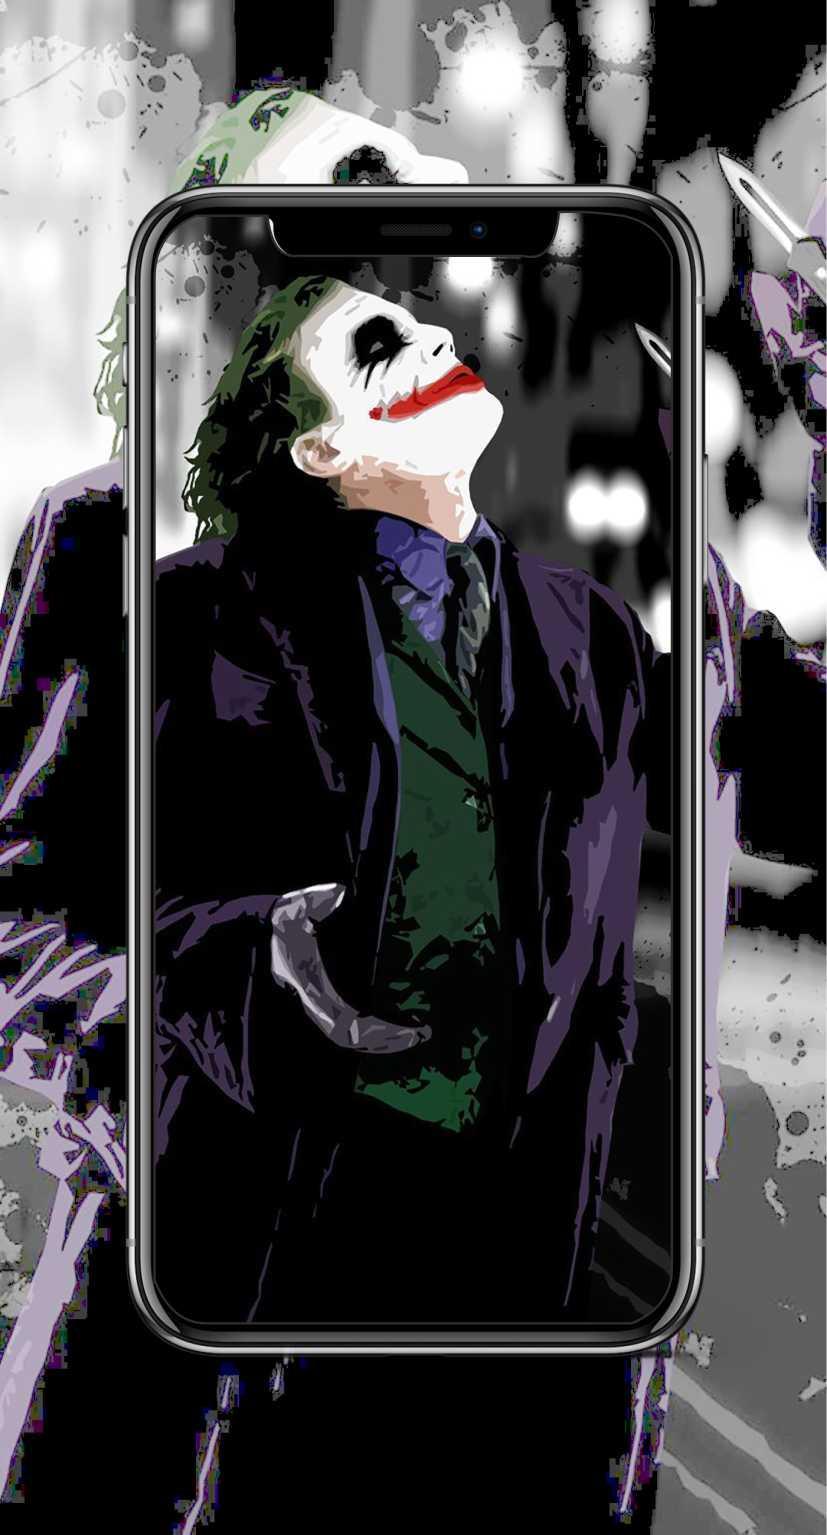 New HD Wallpapers  Joker  4K  2021 for Android APK  Download